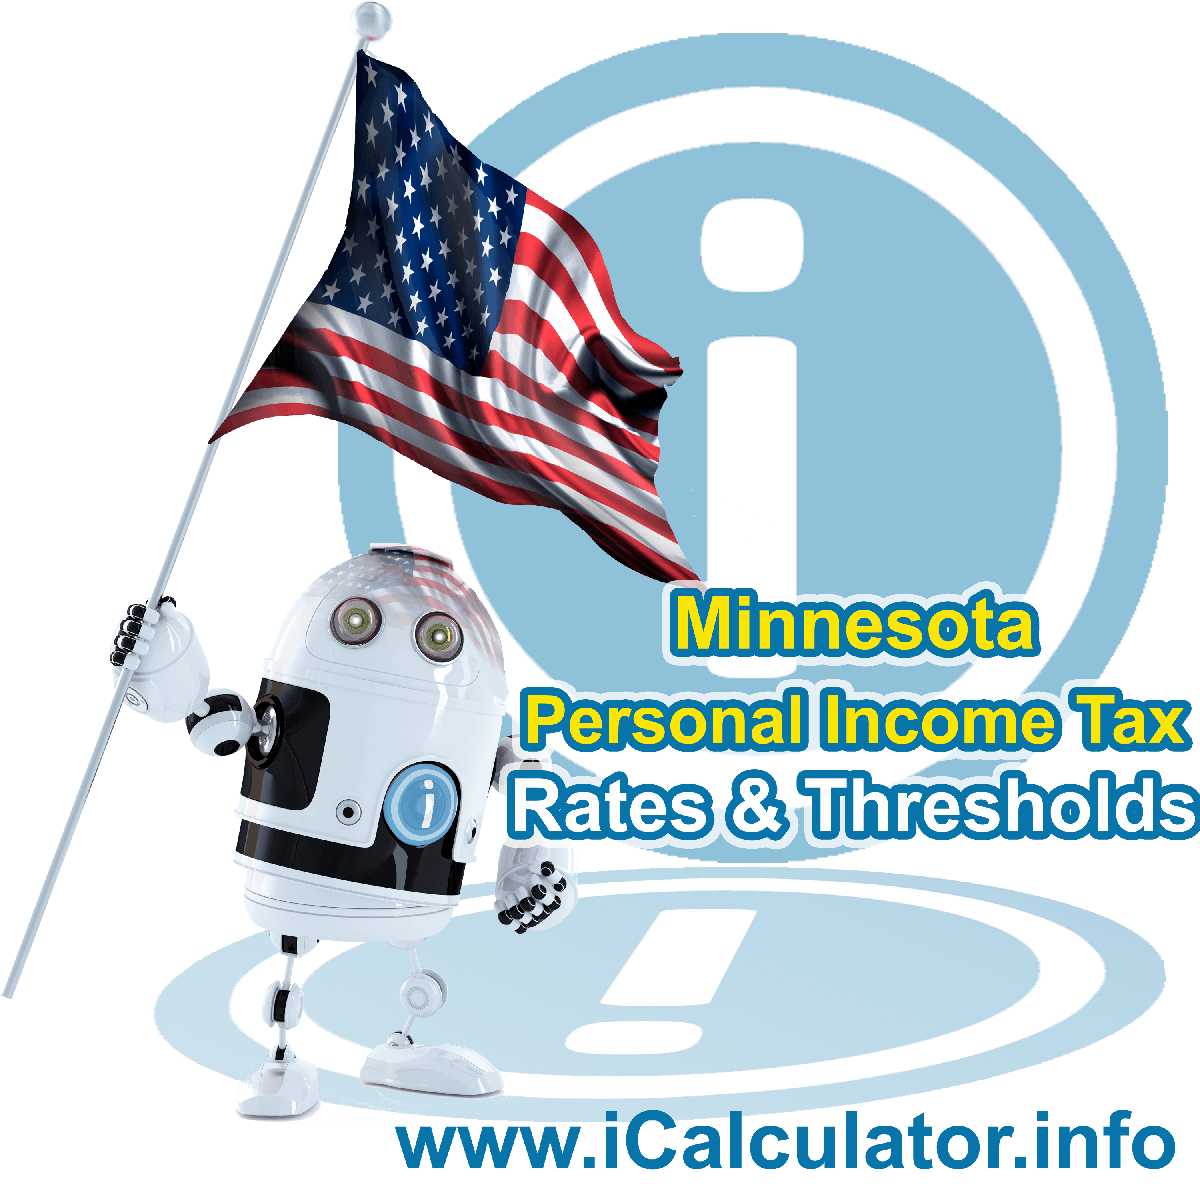 Minnesota State Tax Tables 2016. This image displays details of the Minnesota State Tax Tables for the 2016 tax return year which is provided in support of the 2016 US Tax Calculator